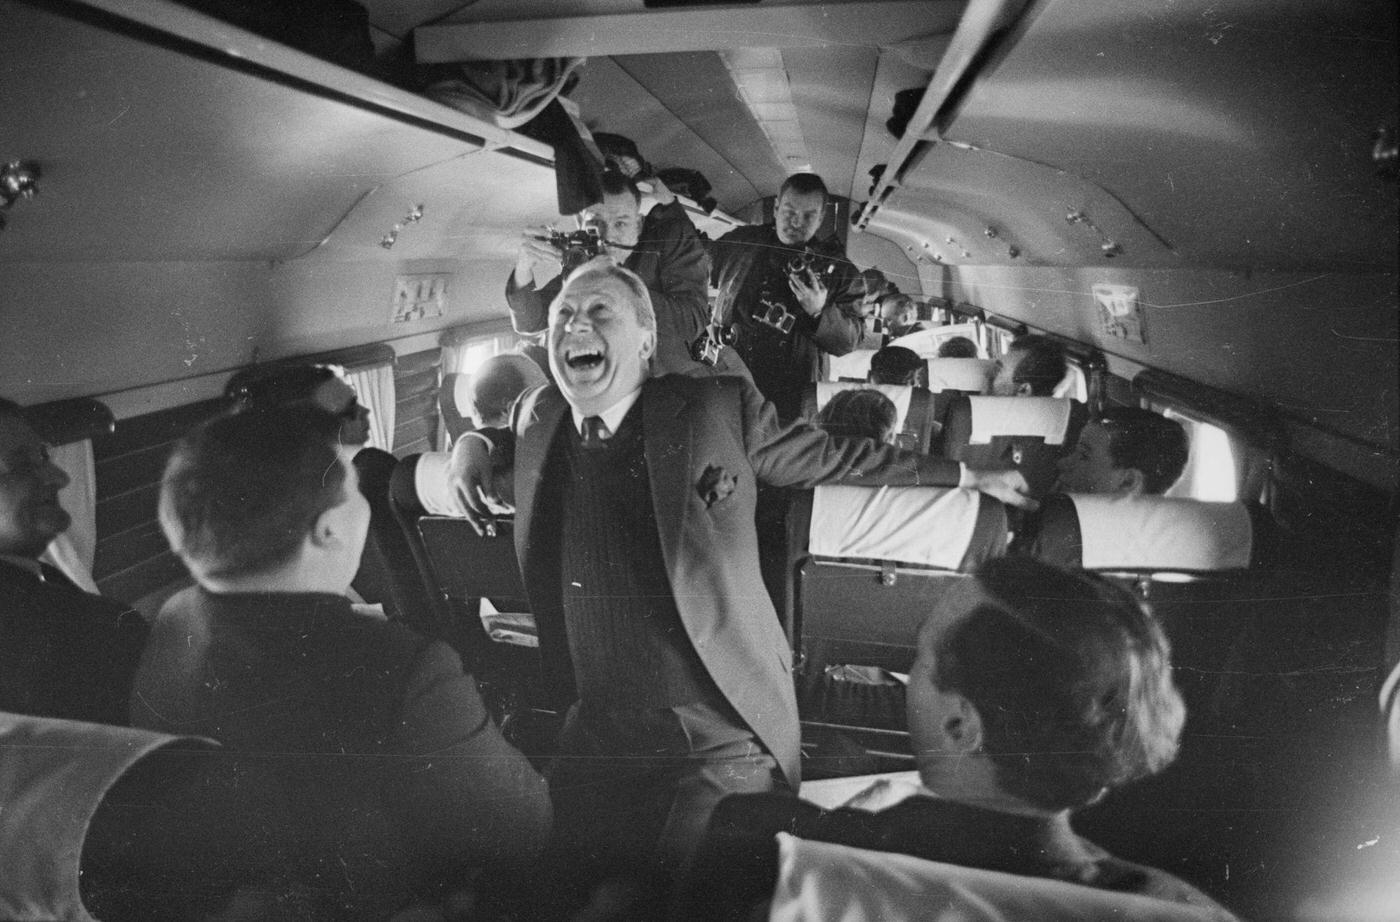 Edward Heath, Conservative Party leader, joining in the fun on board an aircraft during his 1966 electioneering campaign on March 23, 1966.